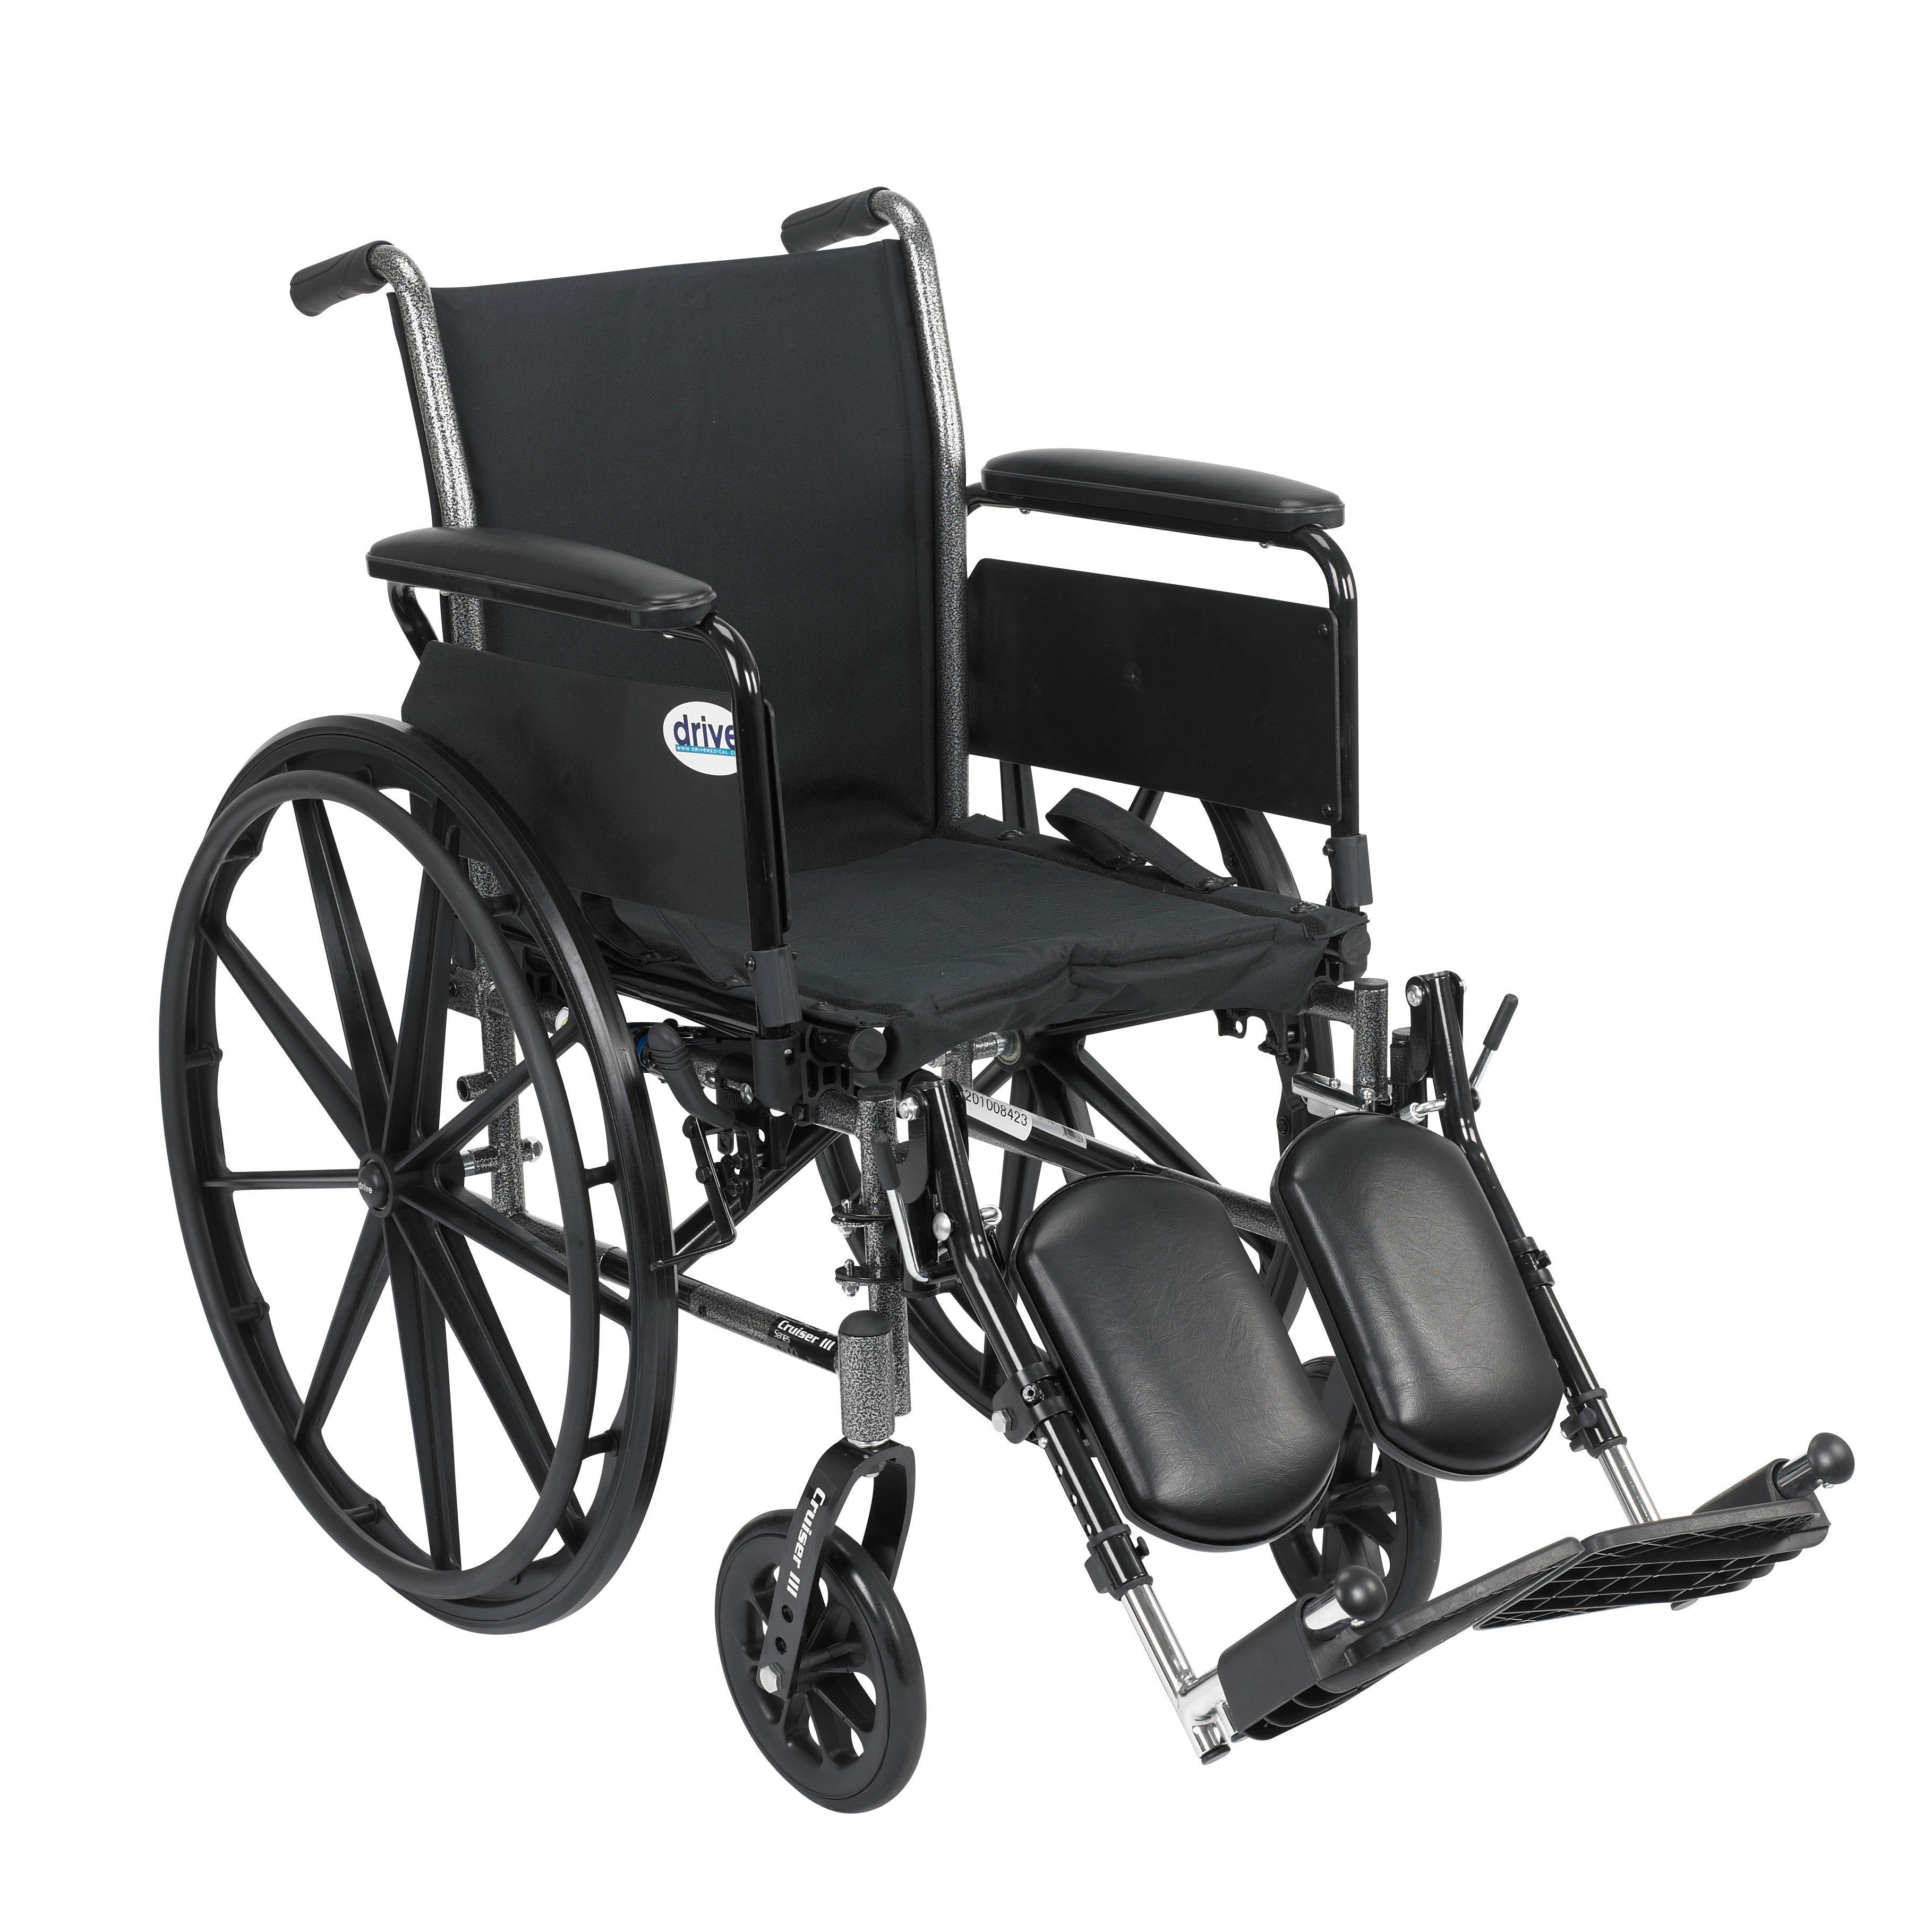 Cruiser III Light Weight Wheelchair with Flip Back Removable Arms, Full Arms, Elevating Leg Rests, 20